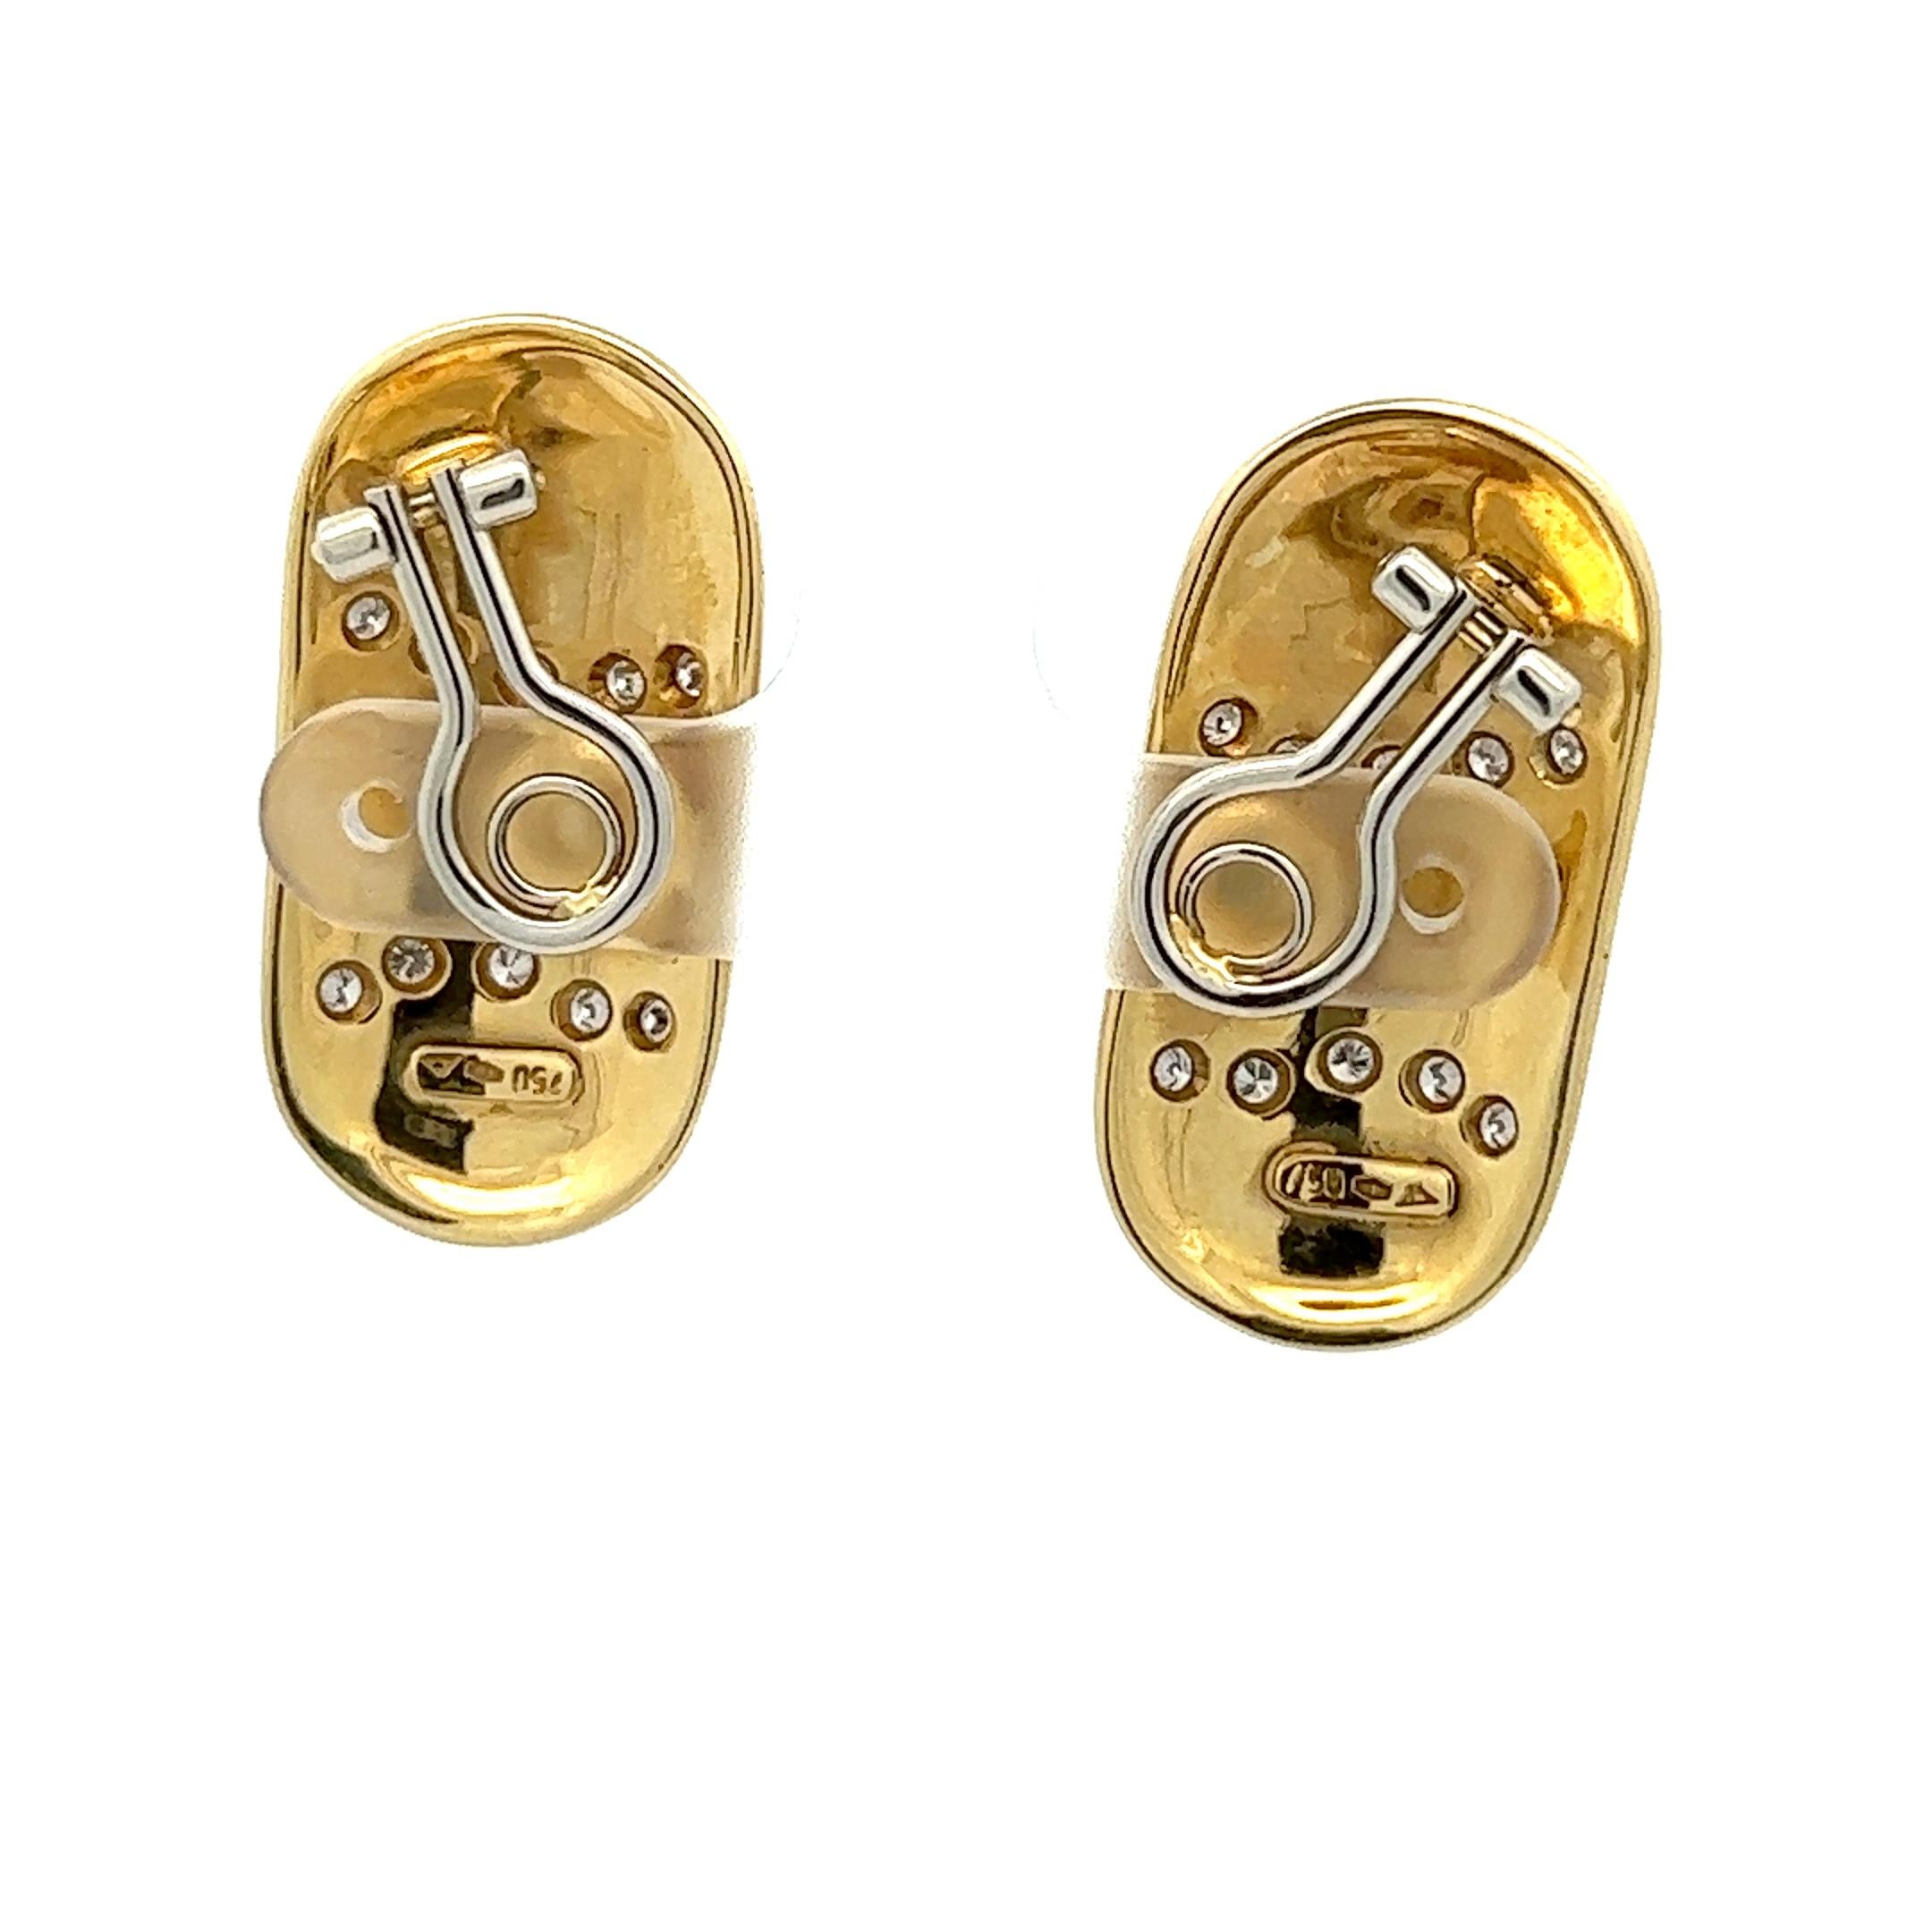 A pair of 18k yellow gold, black enamel and diamond ear clips by Illario.
Total diamond weight: circa 0.7ct, graded while in setting.
Origin: Alessandria, Italy.
Age: circa 1980.
Measurements: circa 3.2 by 1.6 cm.
Hallmarked with the Italian